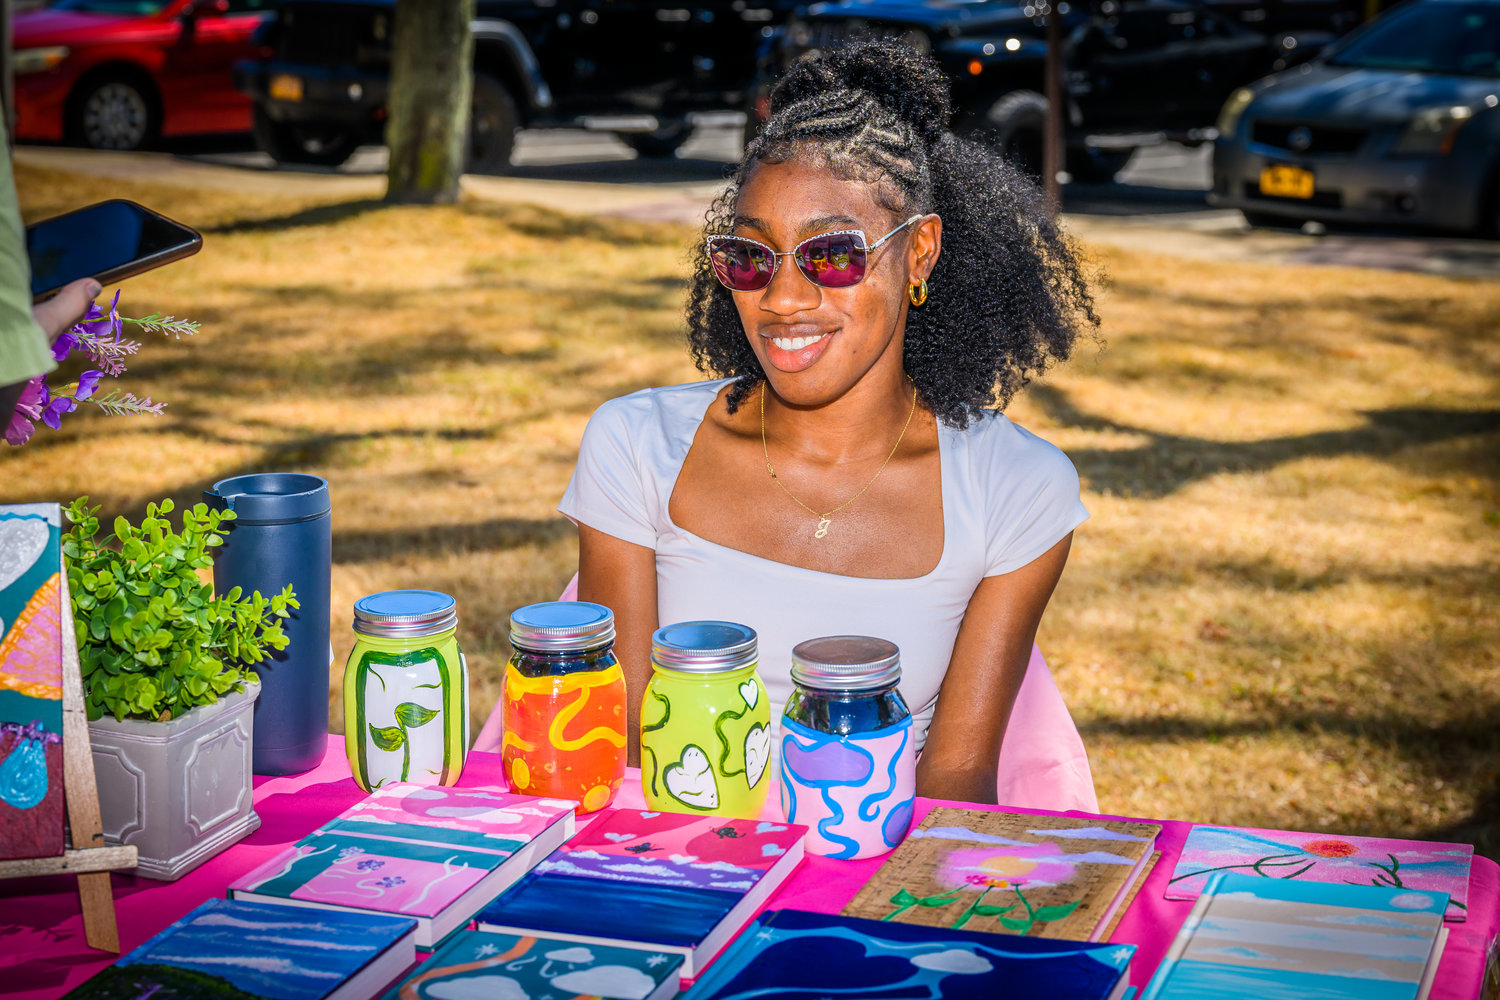 Janelle DeSouza, 26, was among about 15 artists who displayed their work at Arts in the Plaza last Saturday morning. DeSouza is a self-described expressionist.